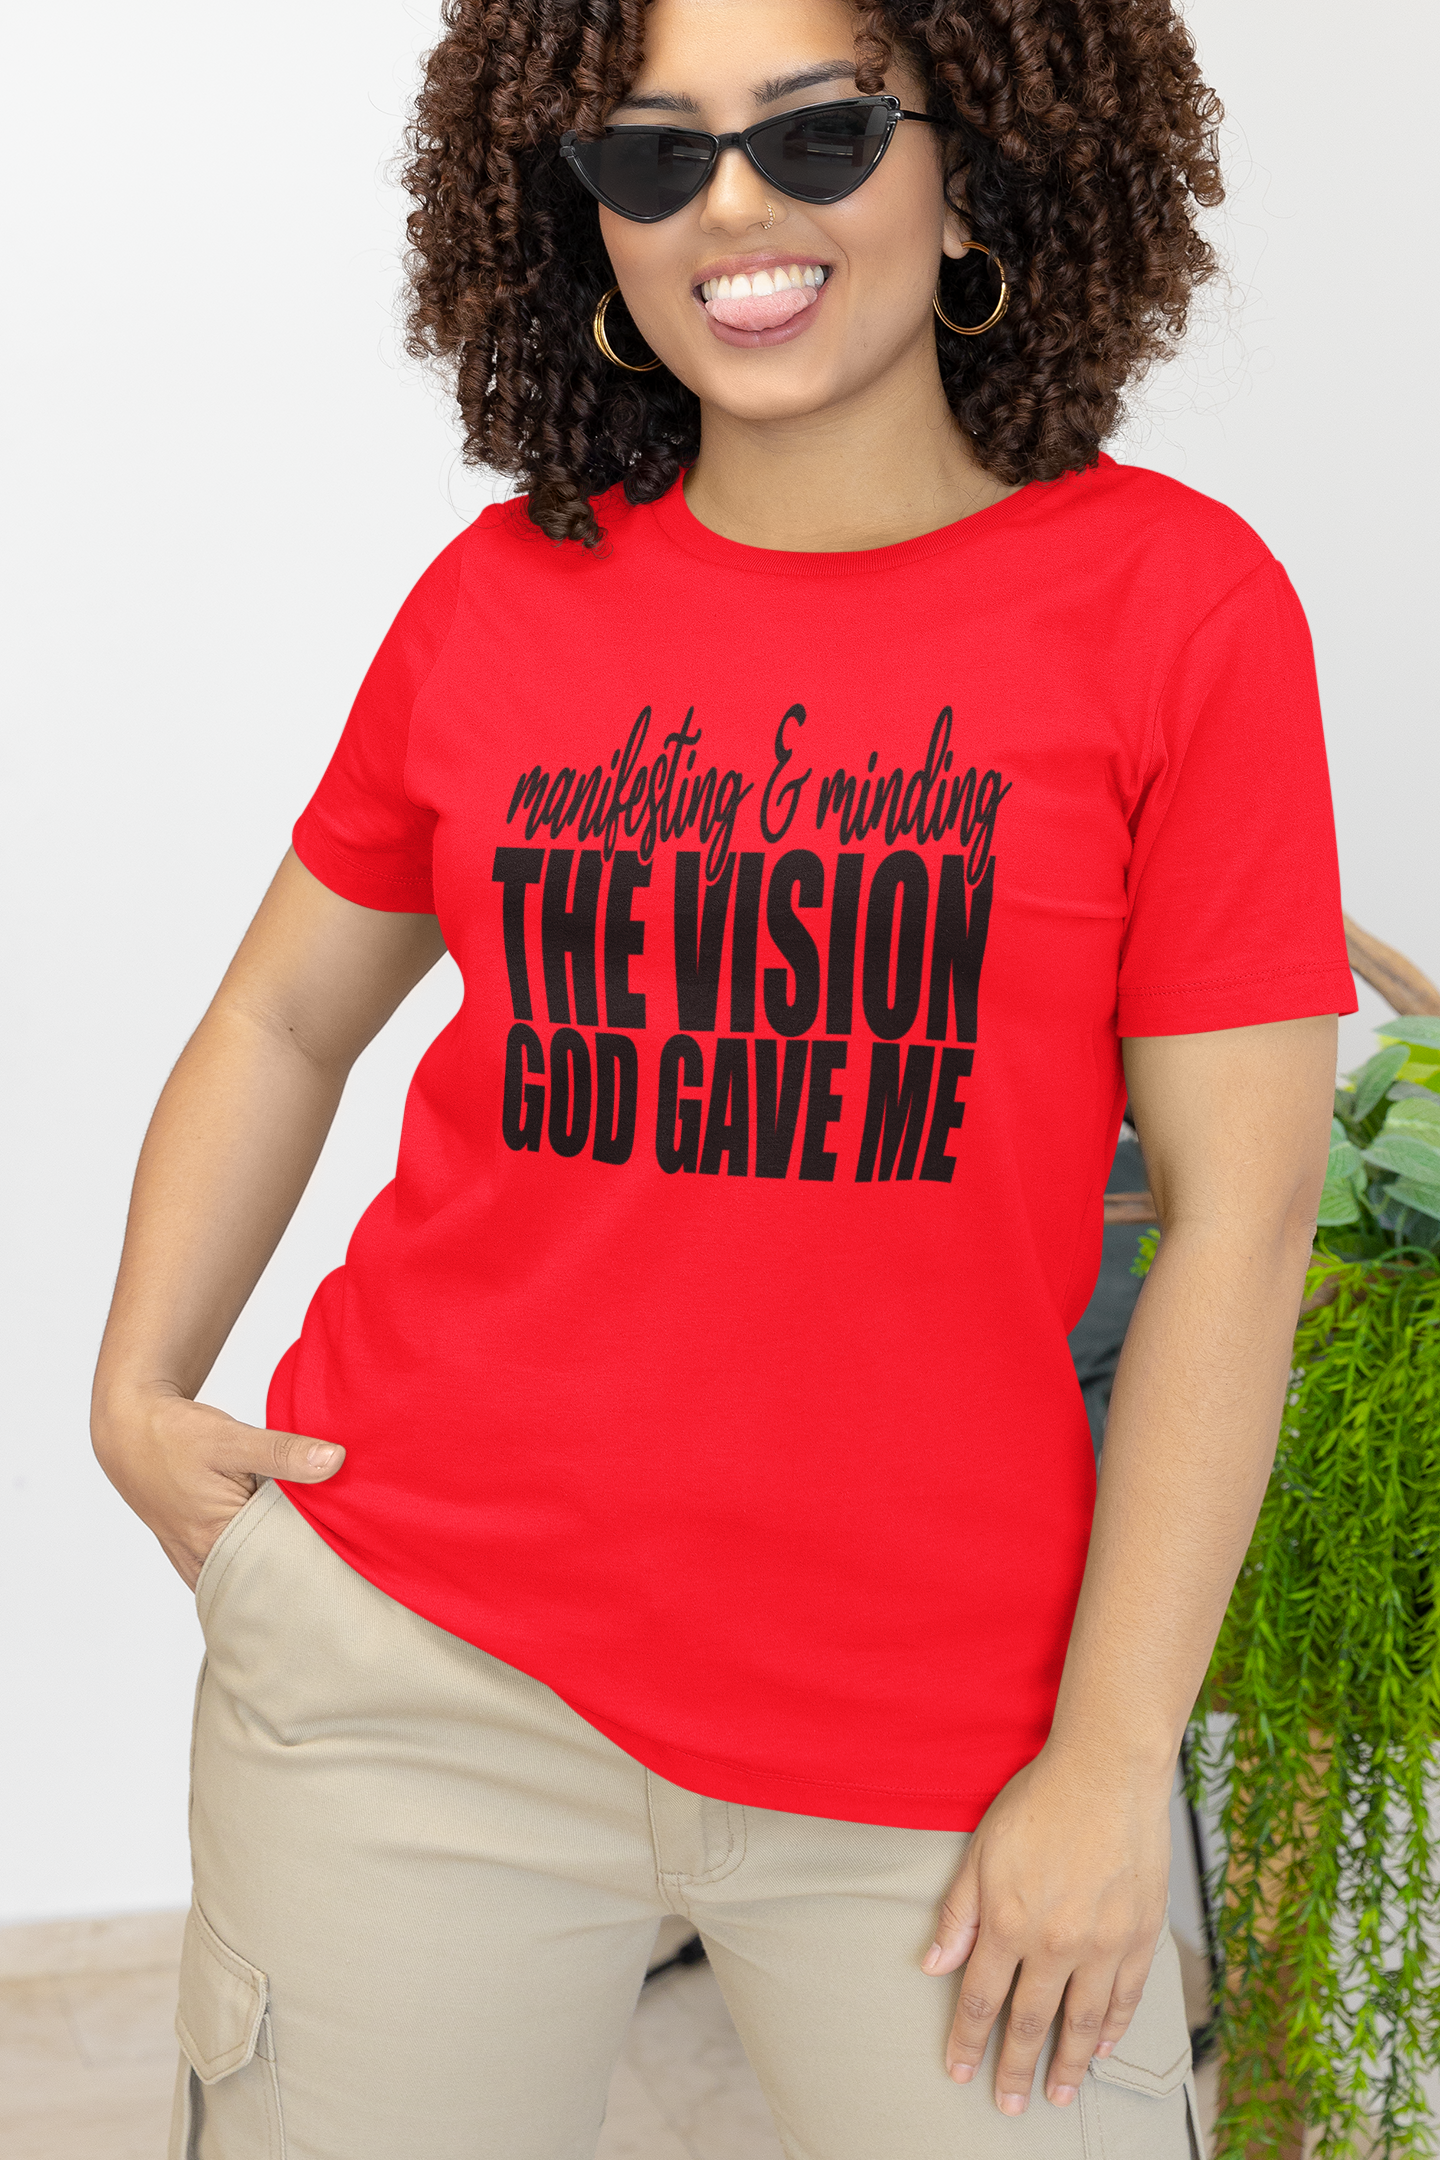 Manifesting and Minding the Vision God Gave Me T-Shirt